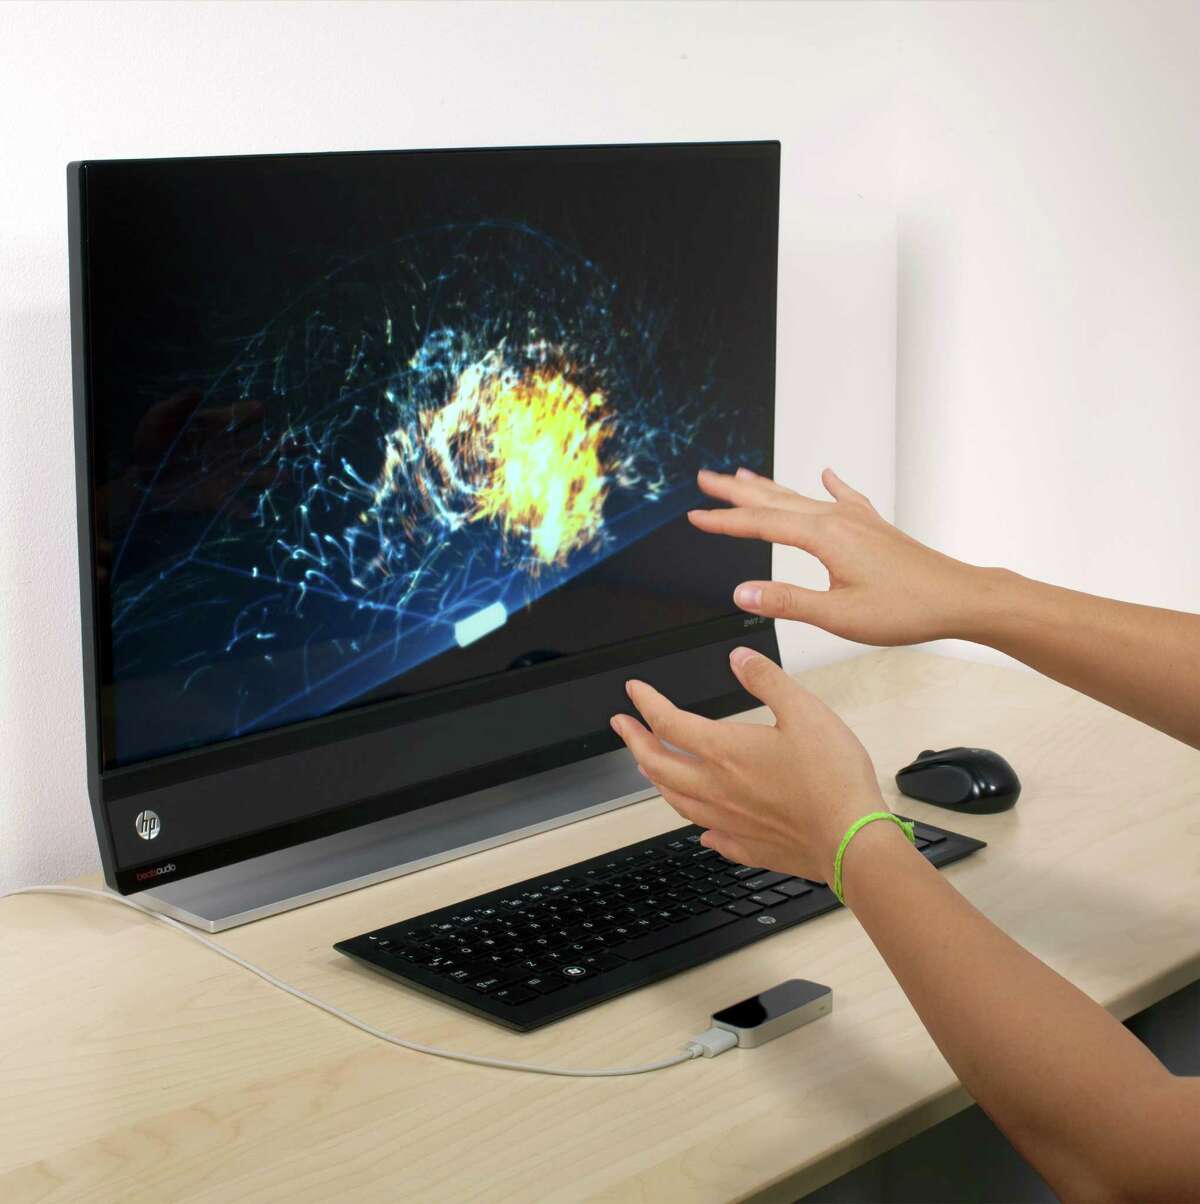 The Leap Motion Controller (pictured at the bottom of the image below the keyboard) offers 3-D motion control for Mac and PC computers using hand and finger movements.